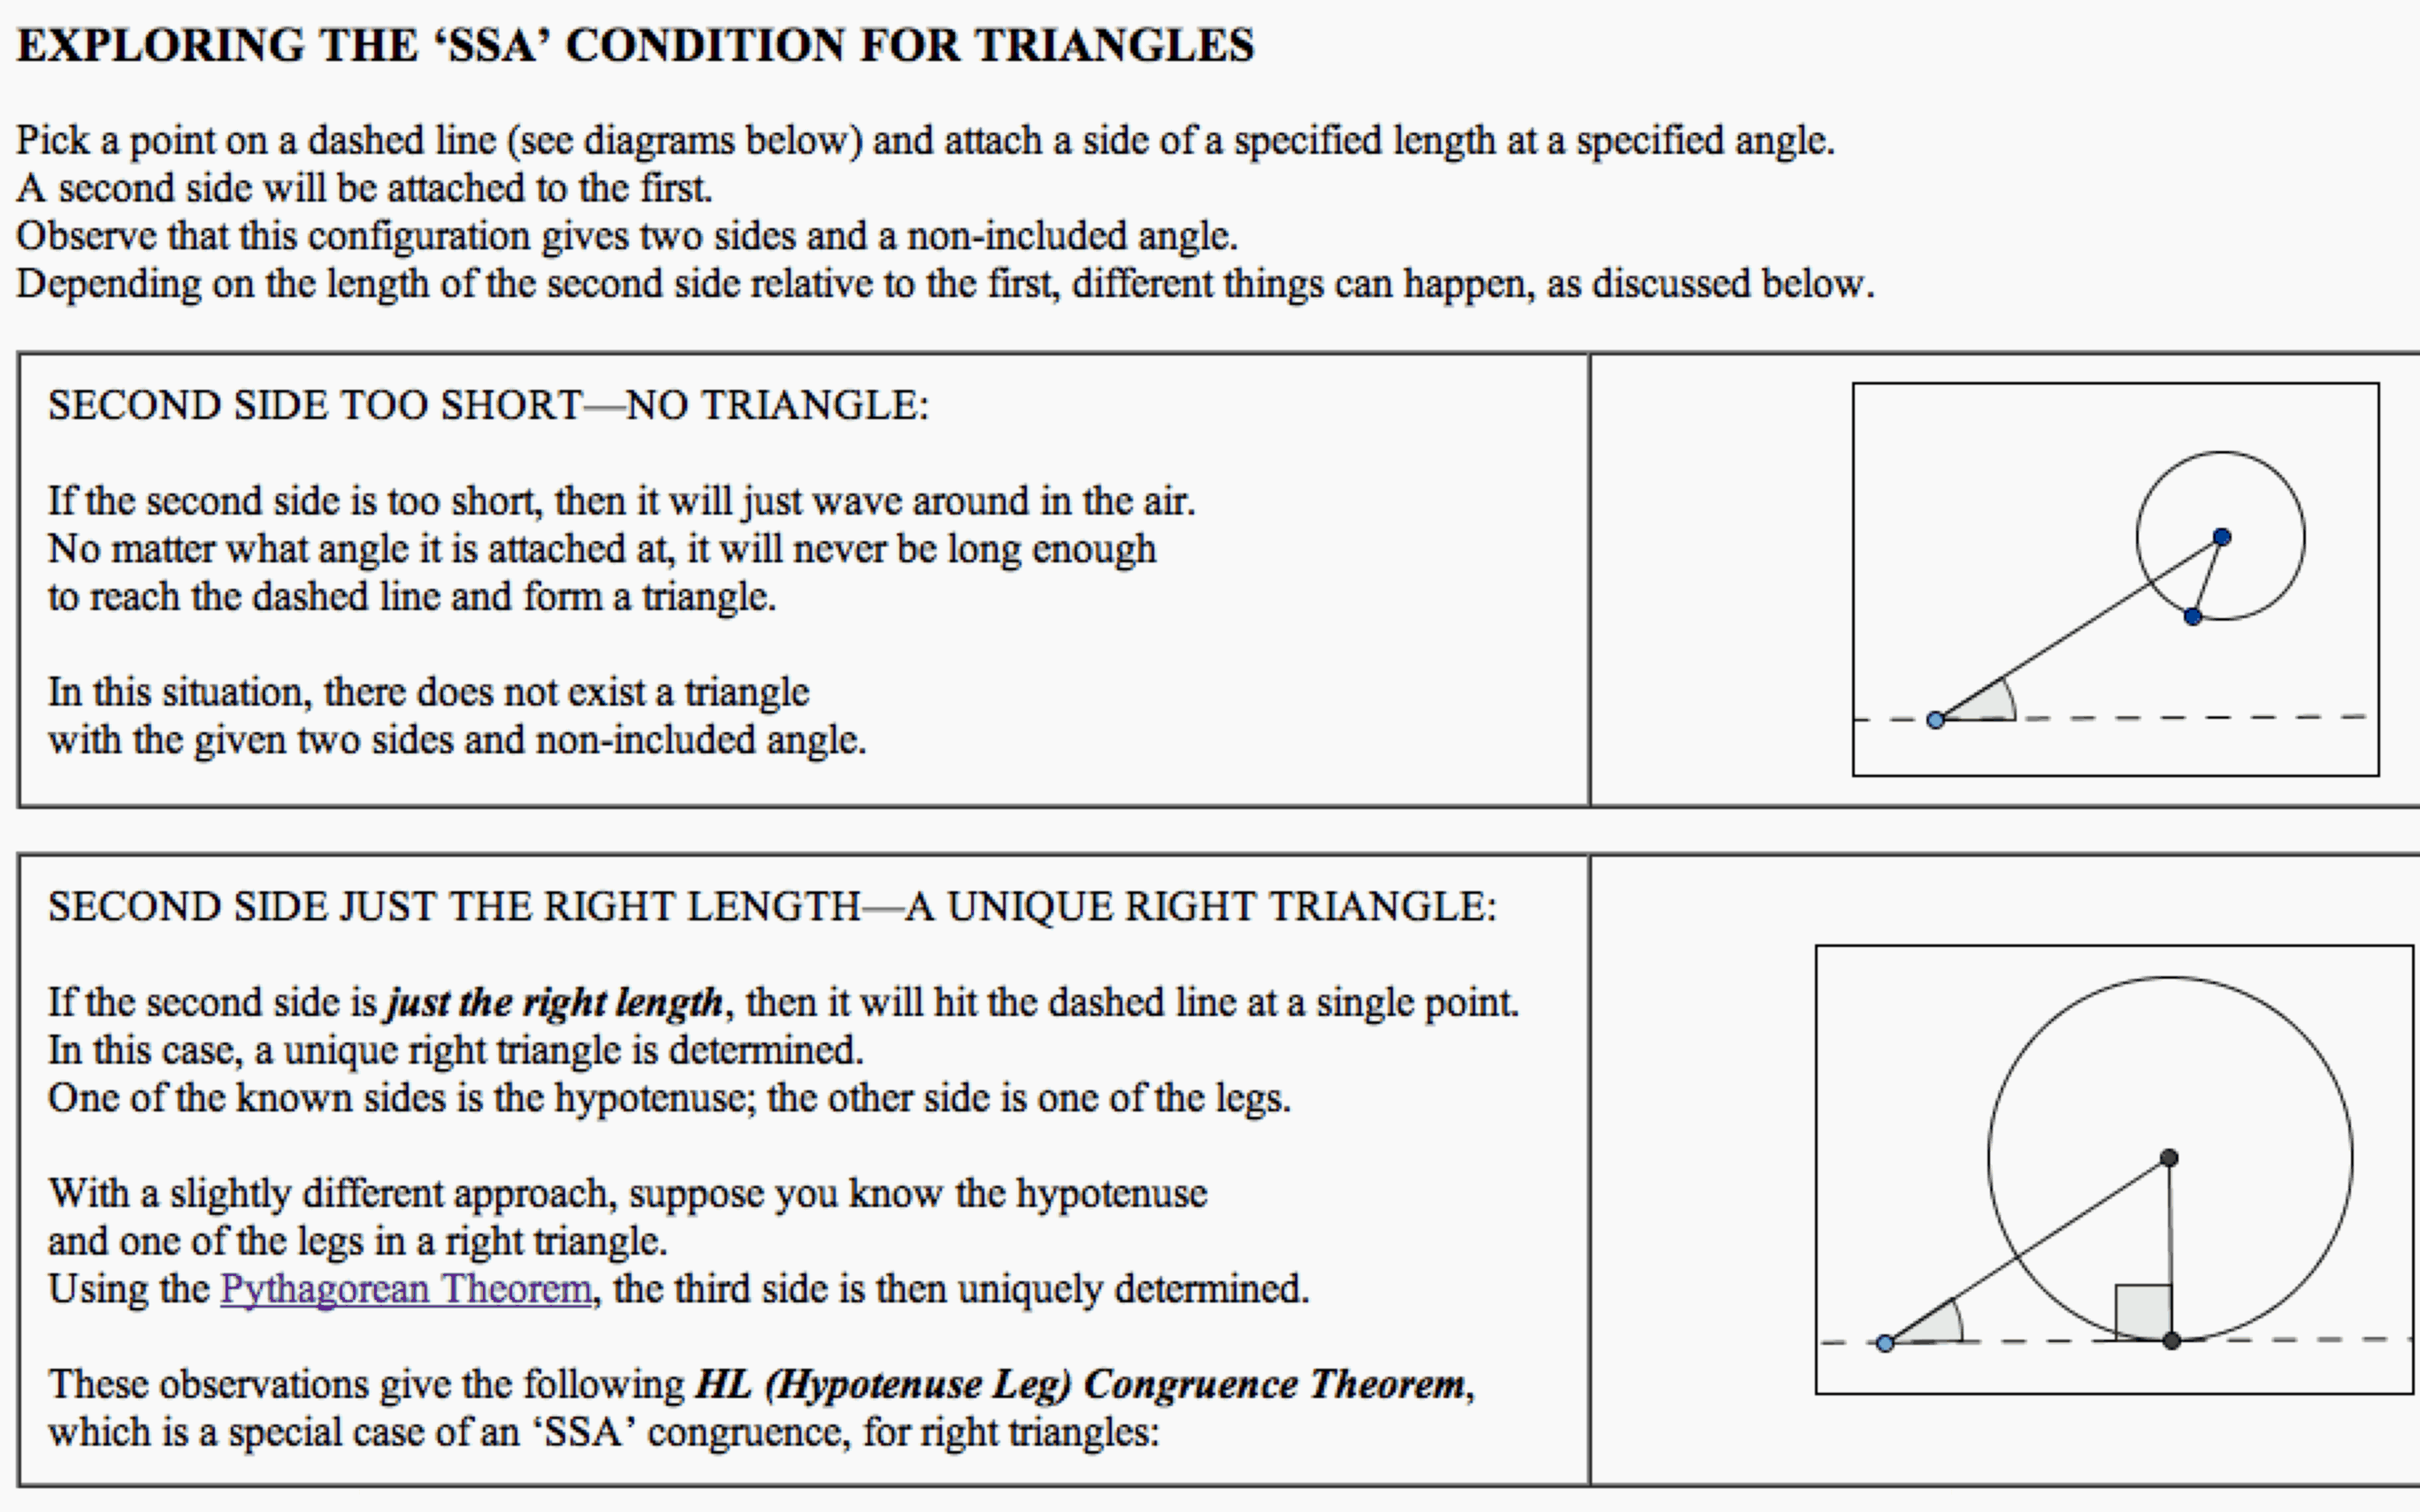 Is there an SSA congruence theorem? No!